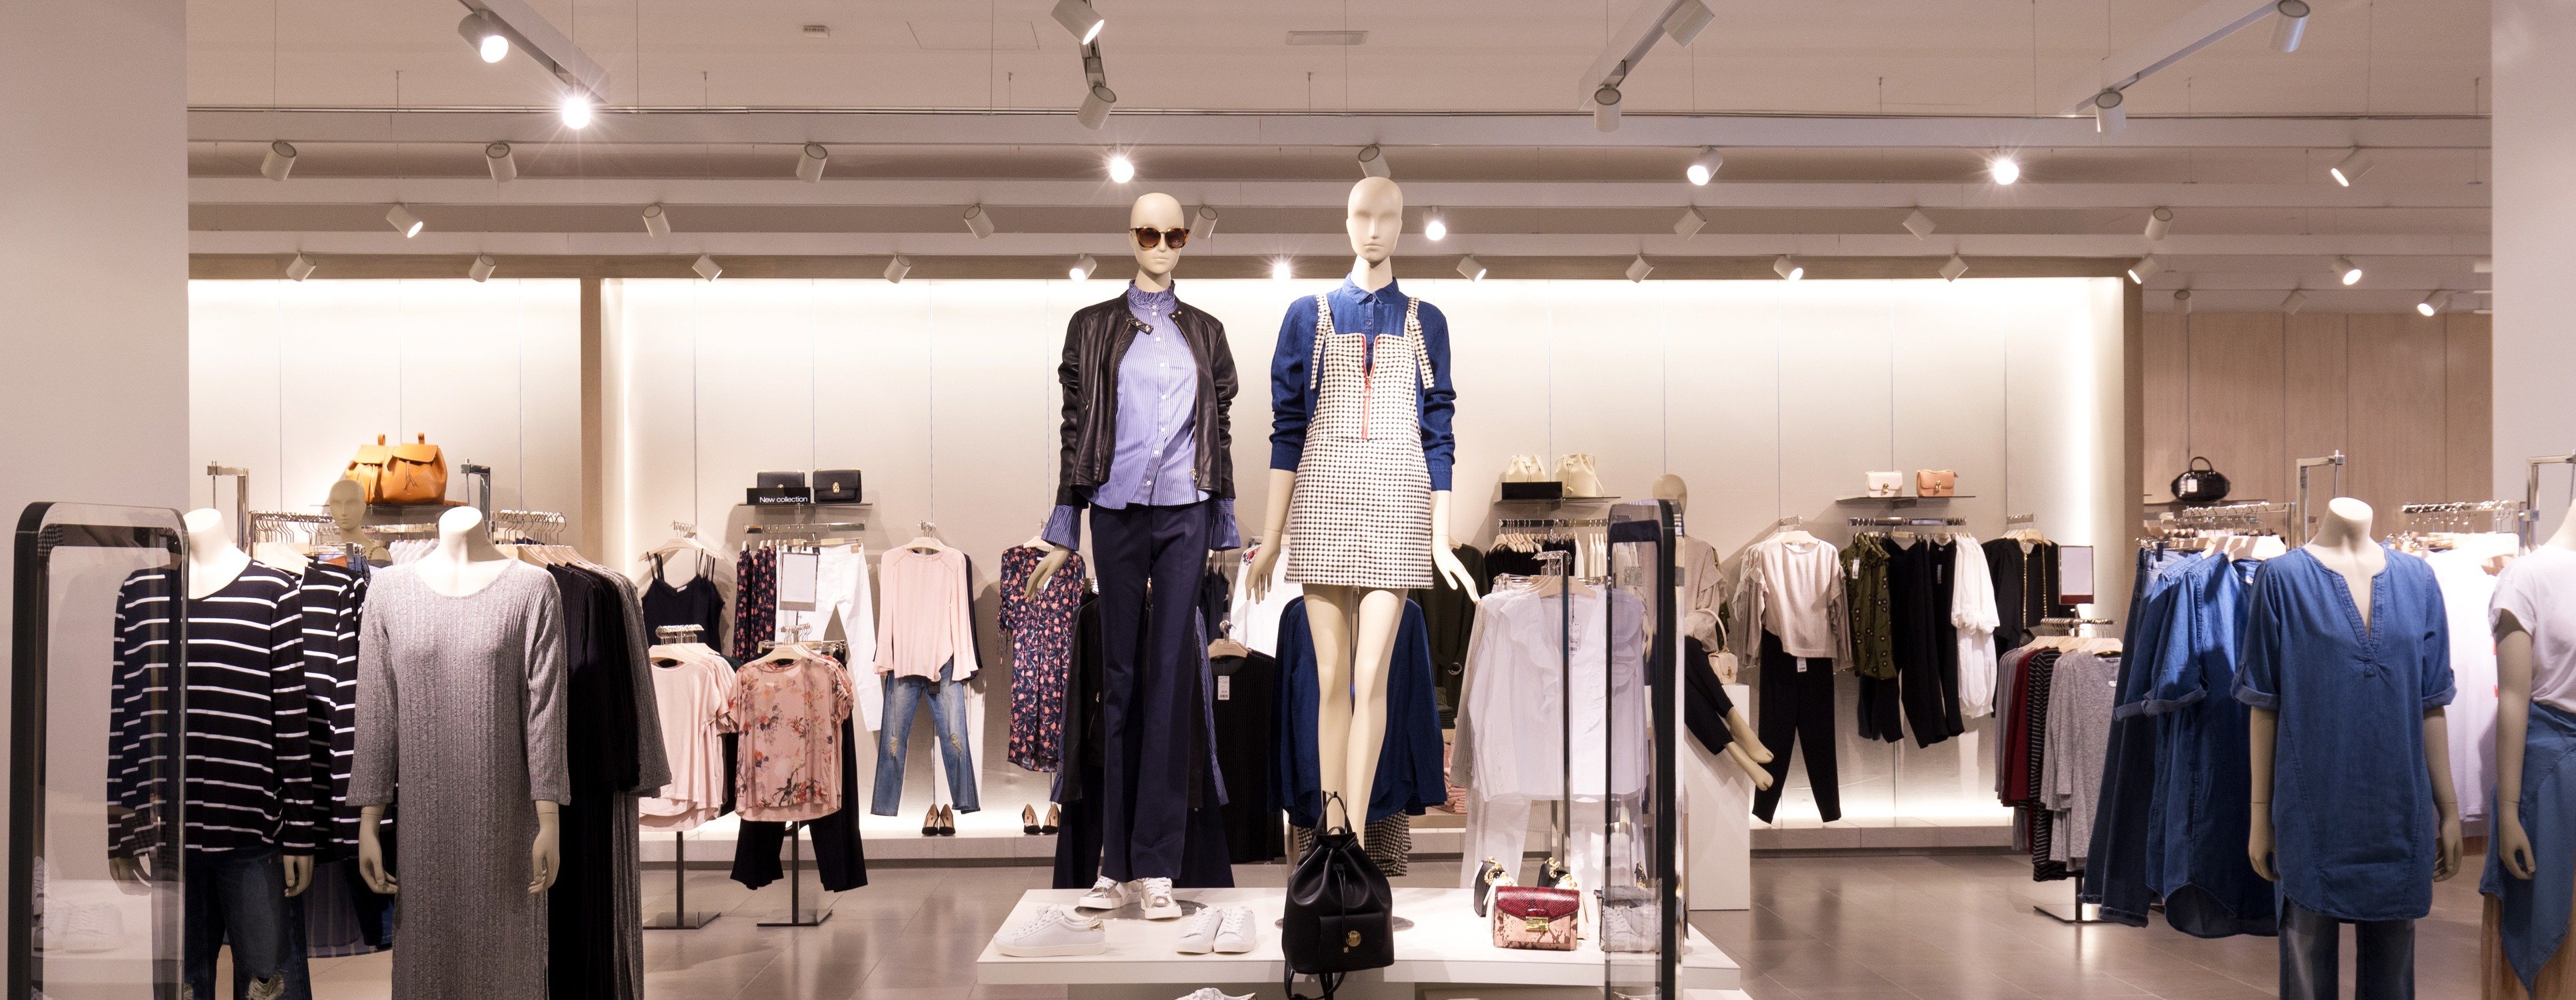 What is Visual Merchandising? How does it affect in-store sales